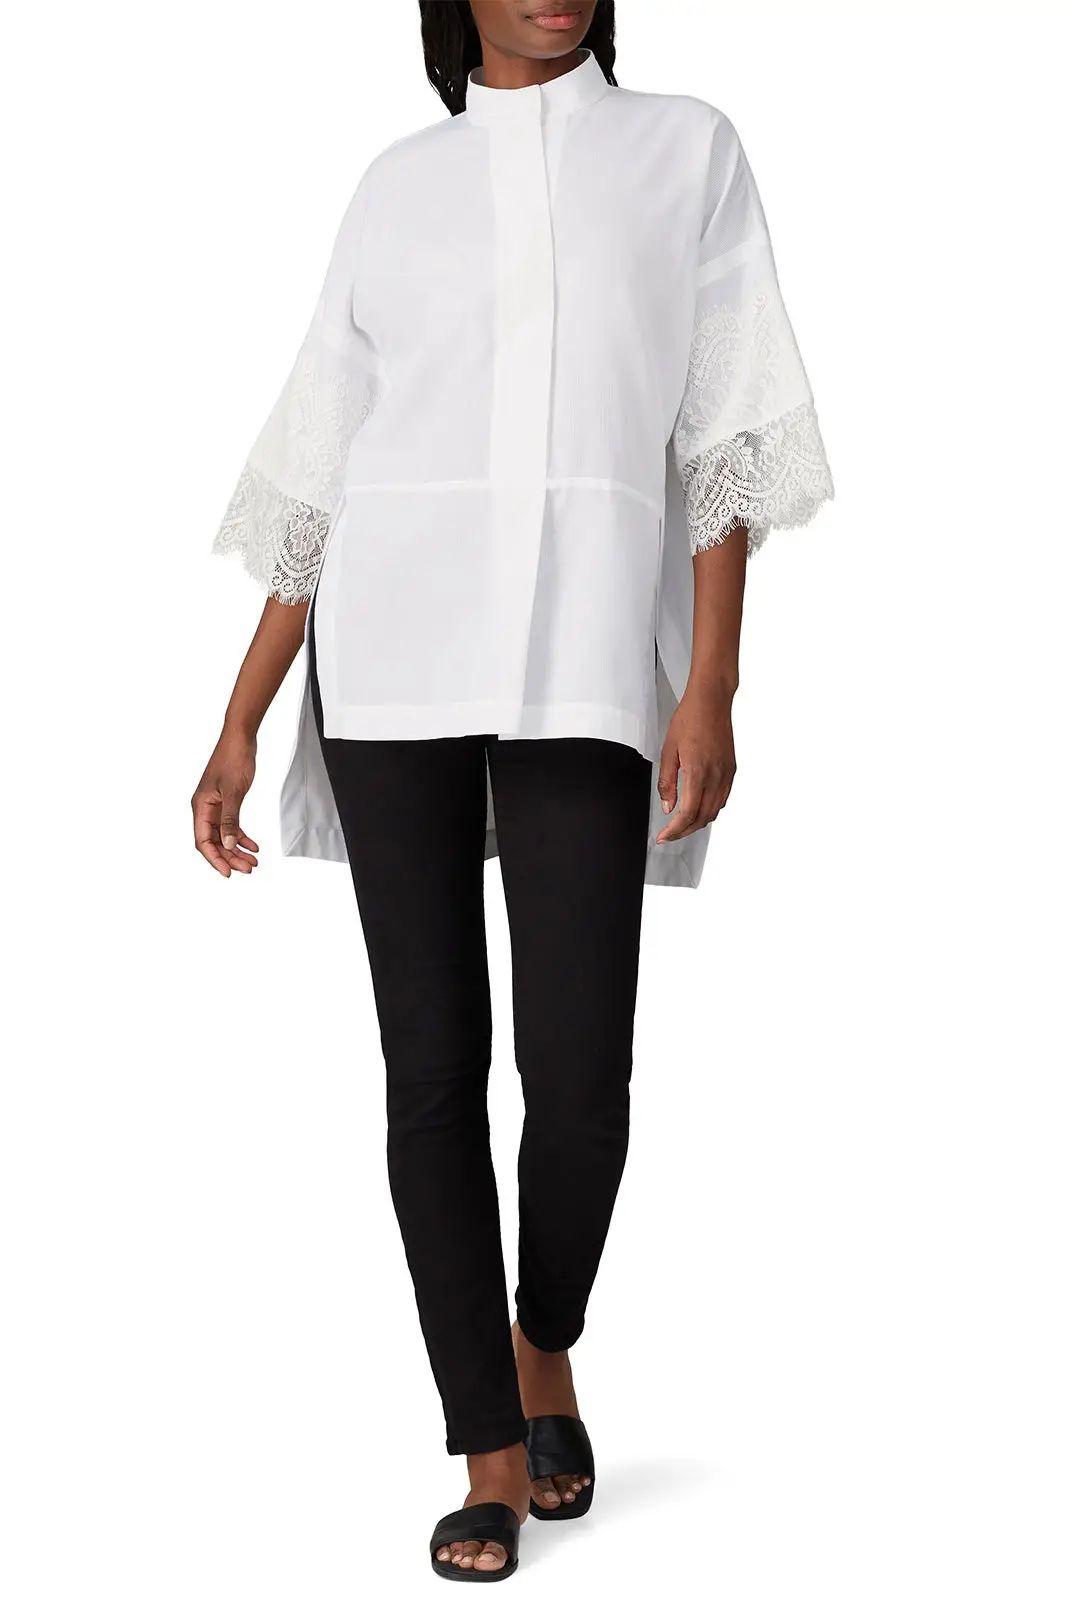 Victor Alfaro Collective Lace Sleeve Button Down Shirt | Rent The Runway